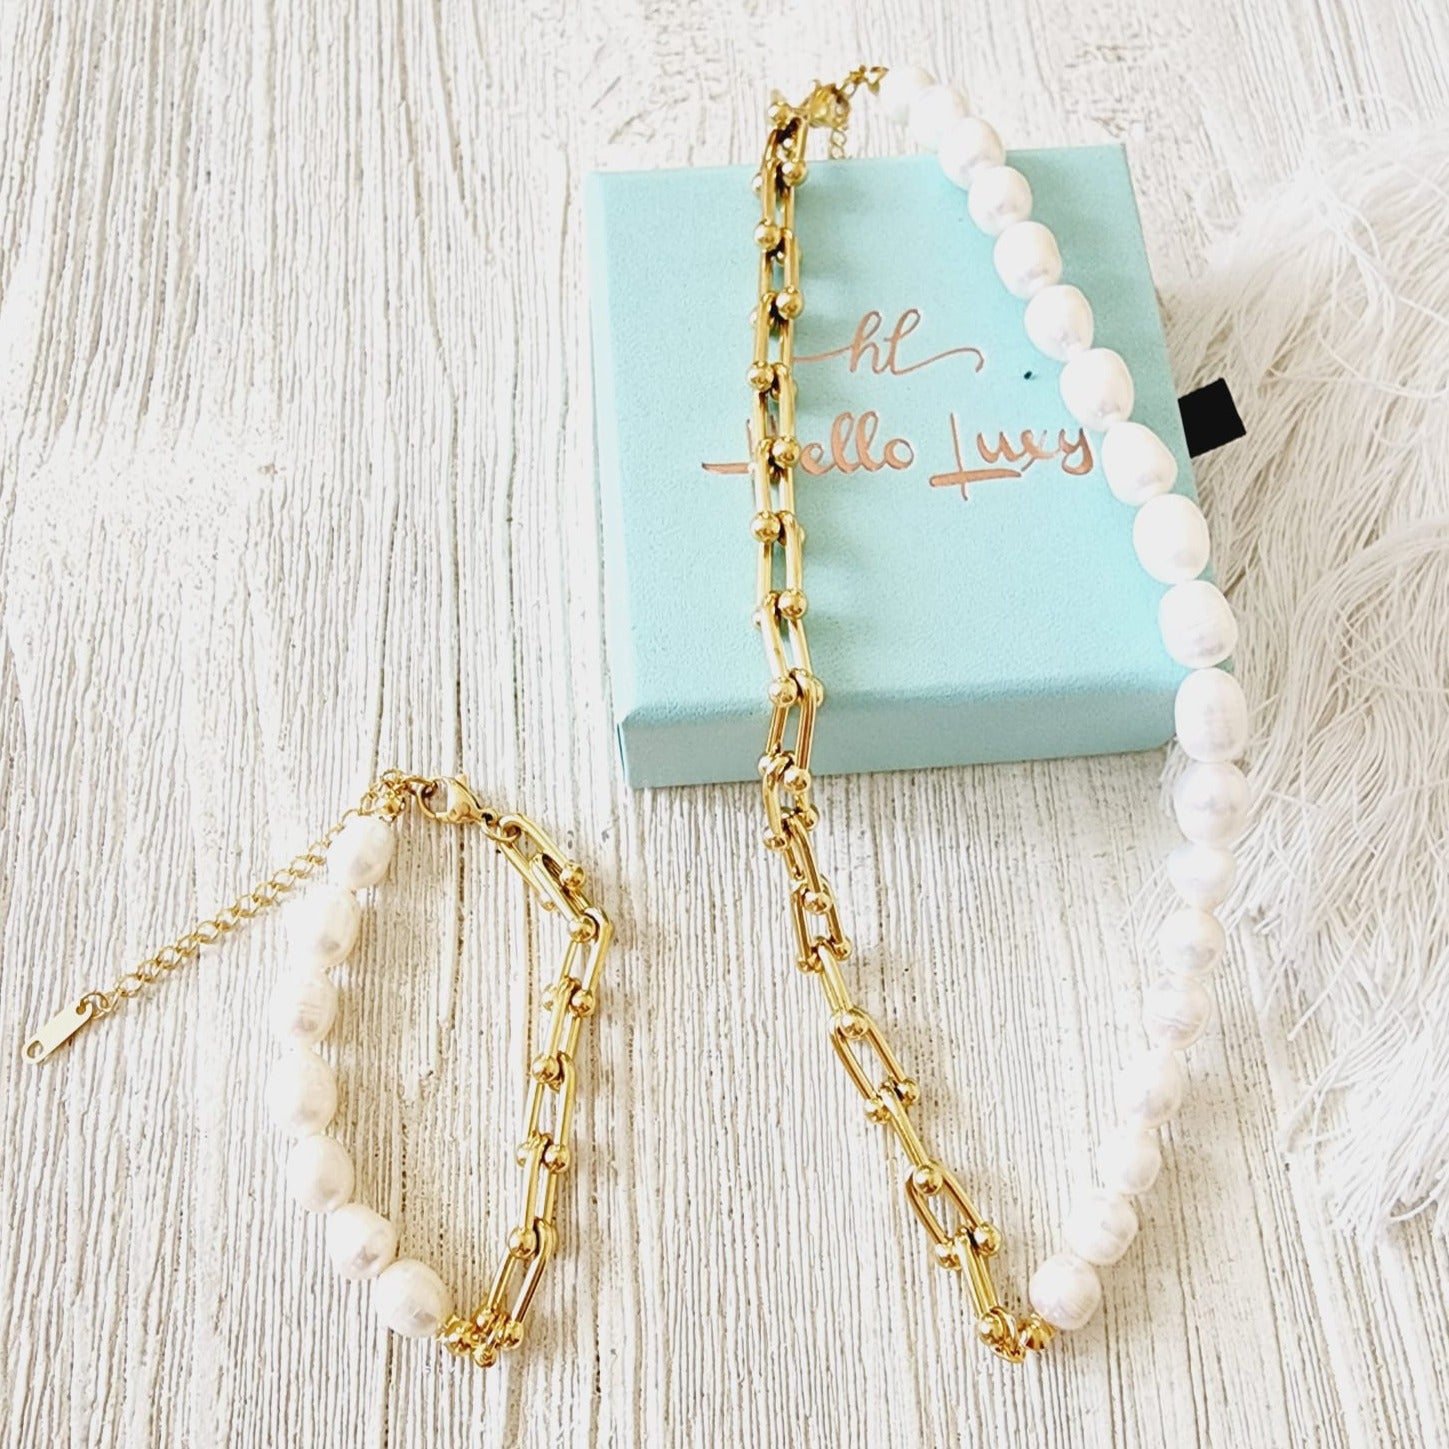 Pearl Necklace, baroque pearl necklace, herringbone necklace, Water Resistant Necklace, Water Resistant Jewelry, Water Resistant jewelry, versatile necklace, Pearl jewelry set, real pearl necklace, pearl necklace meaning, freshwater pearl necklace, pearl necklace set, pearls necklace amazon, fresh water pearls necklace, real pearls necklace, 18k gold plated bold jewelry set, baroque pearls necklace, pearls gold necklace, pearls baroque necklace, Summer Jewelry, tropical glamour